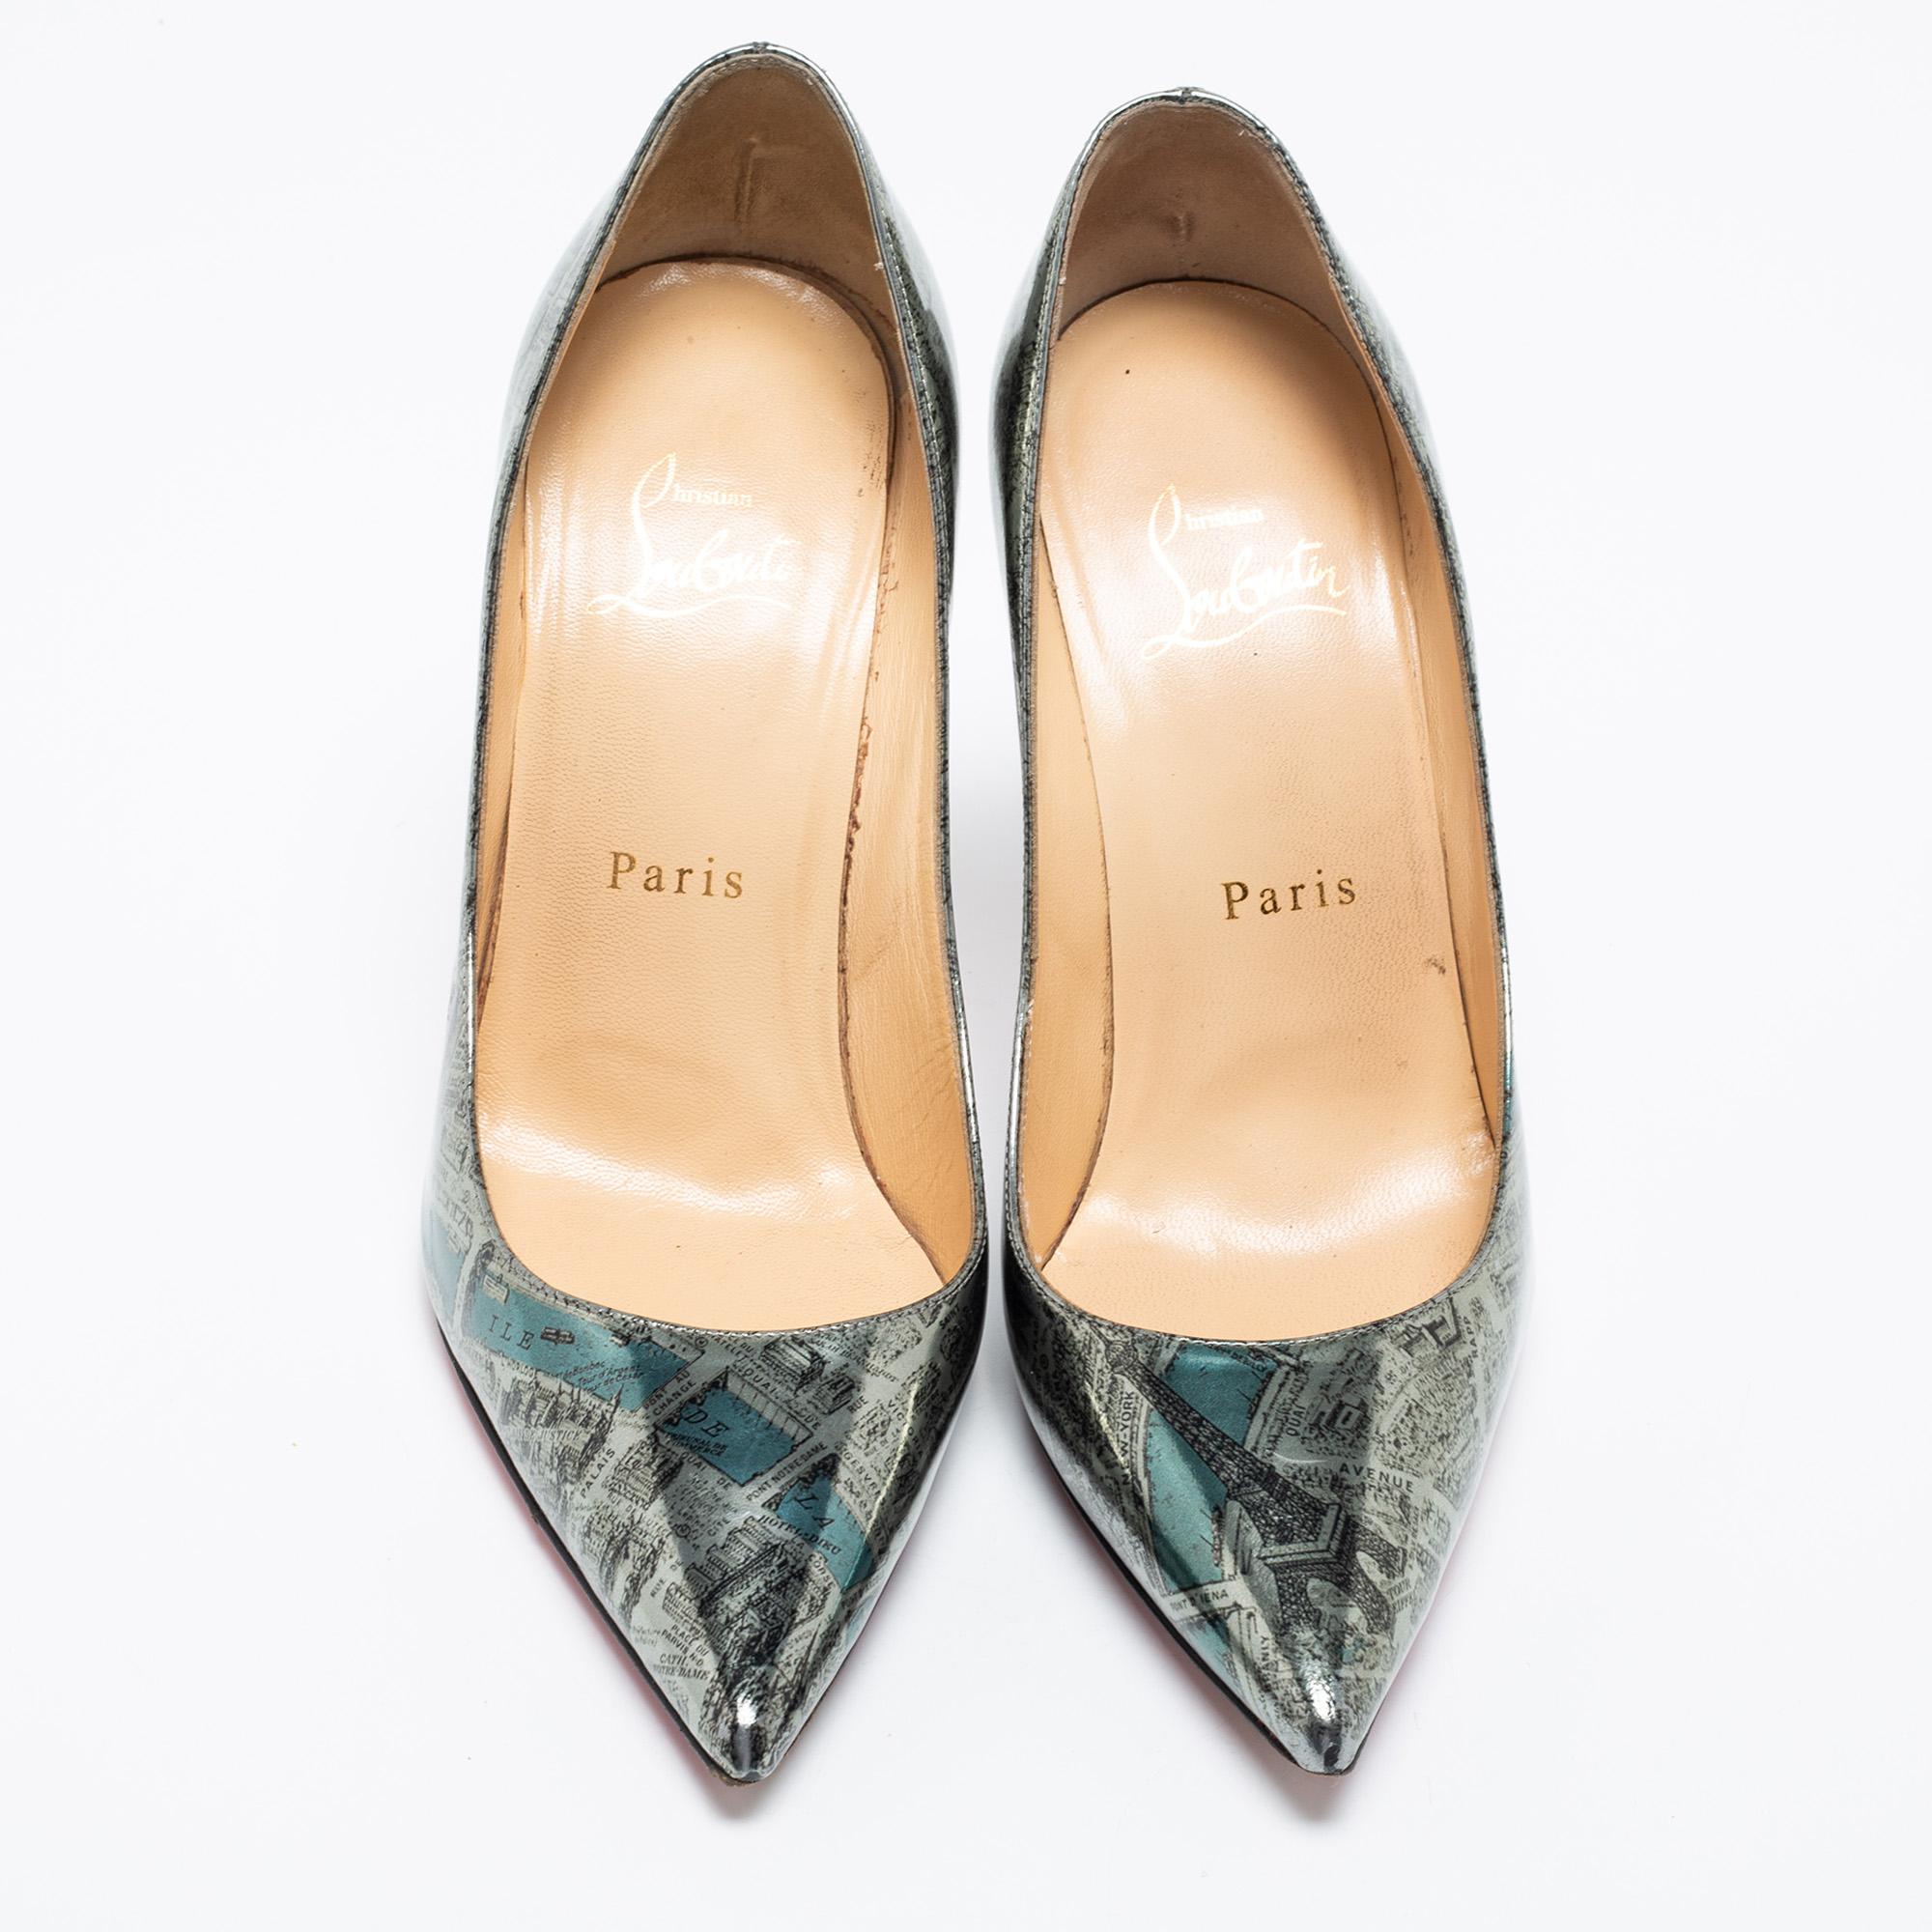 Project an elegant take in a comfortable manner with these timeless pumps by Christian Louboutin. Crafted using Paris Map-printed patent leather, they feature pointed toes and 10 cm heels.

